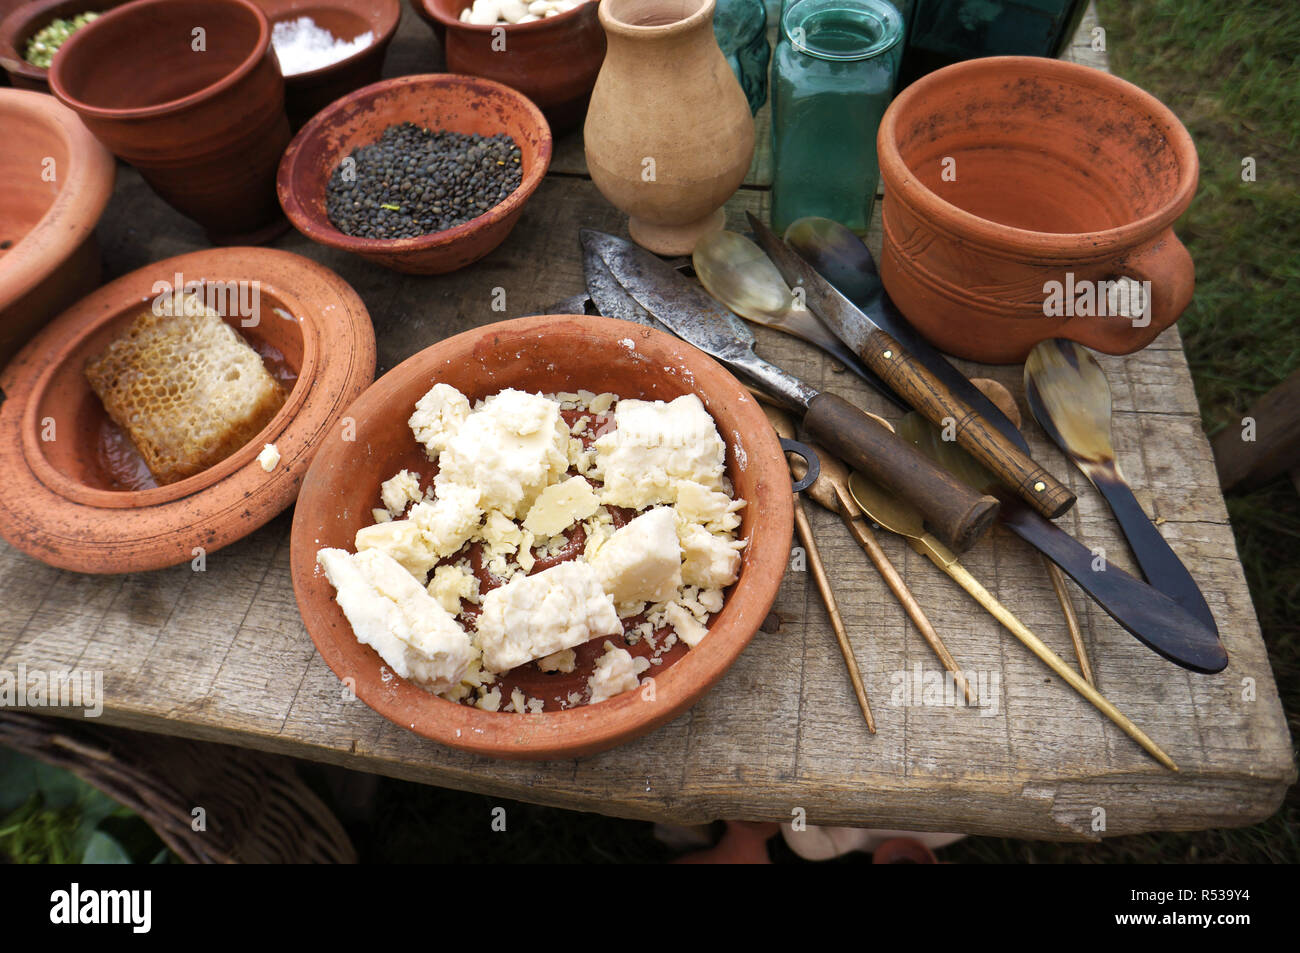 A display of Roman food and cooking utensils. Stock Photo